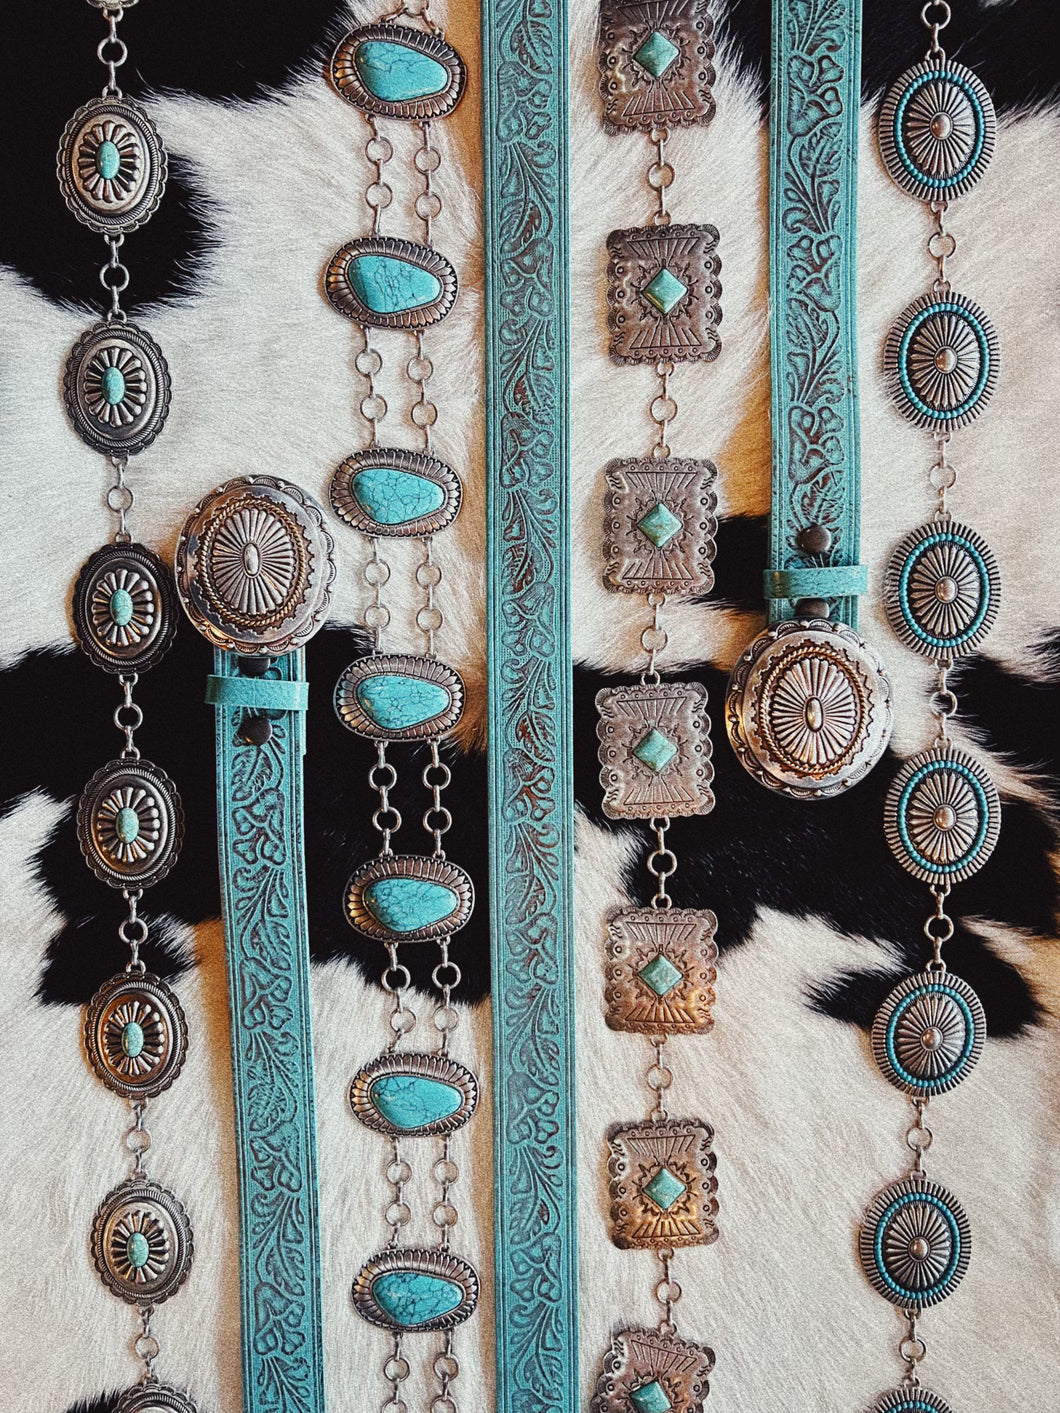 Concho Belt Collection